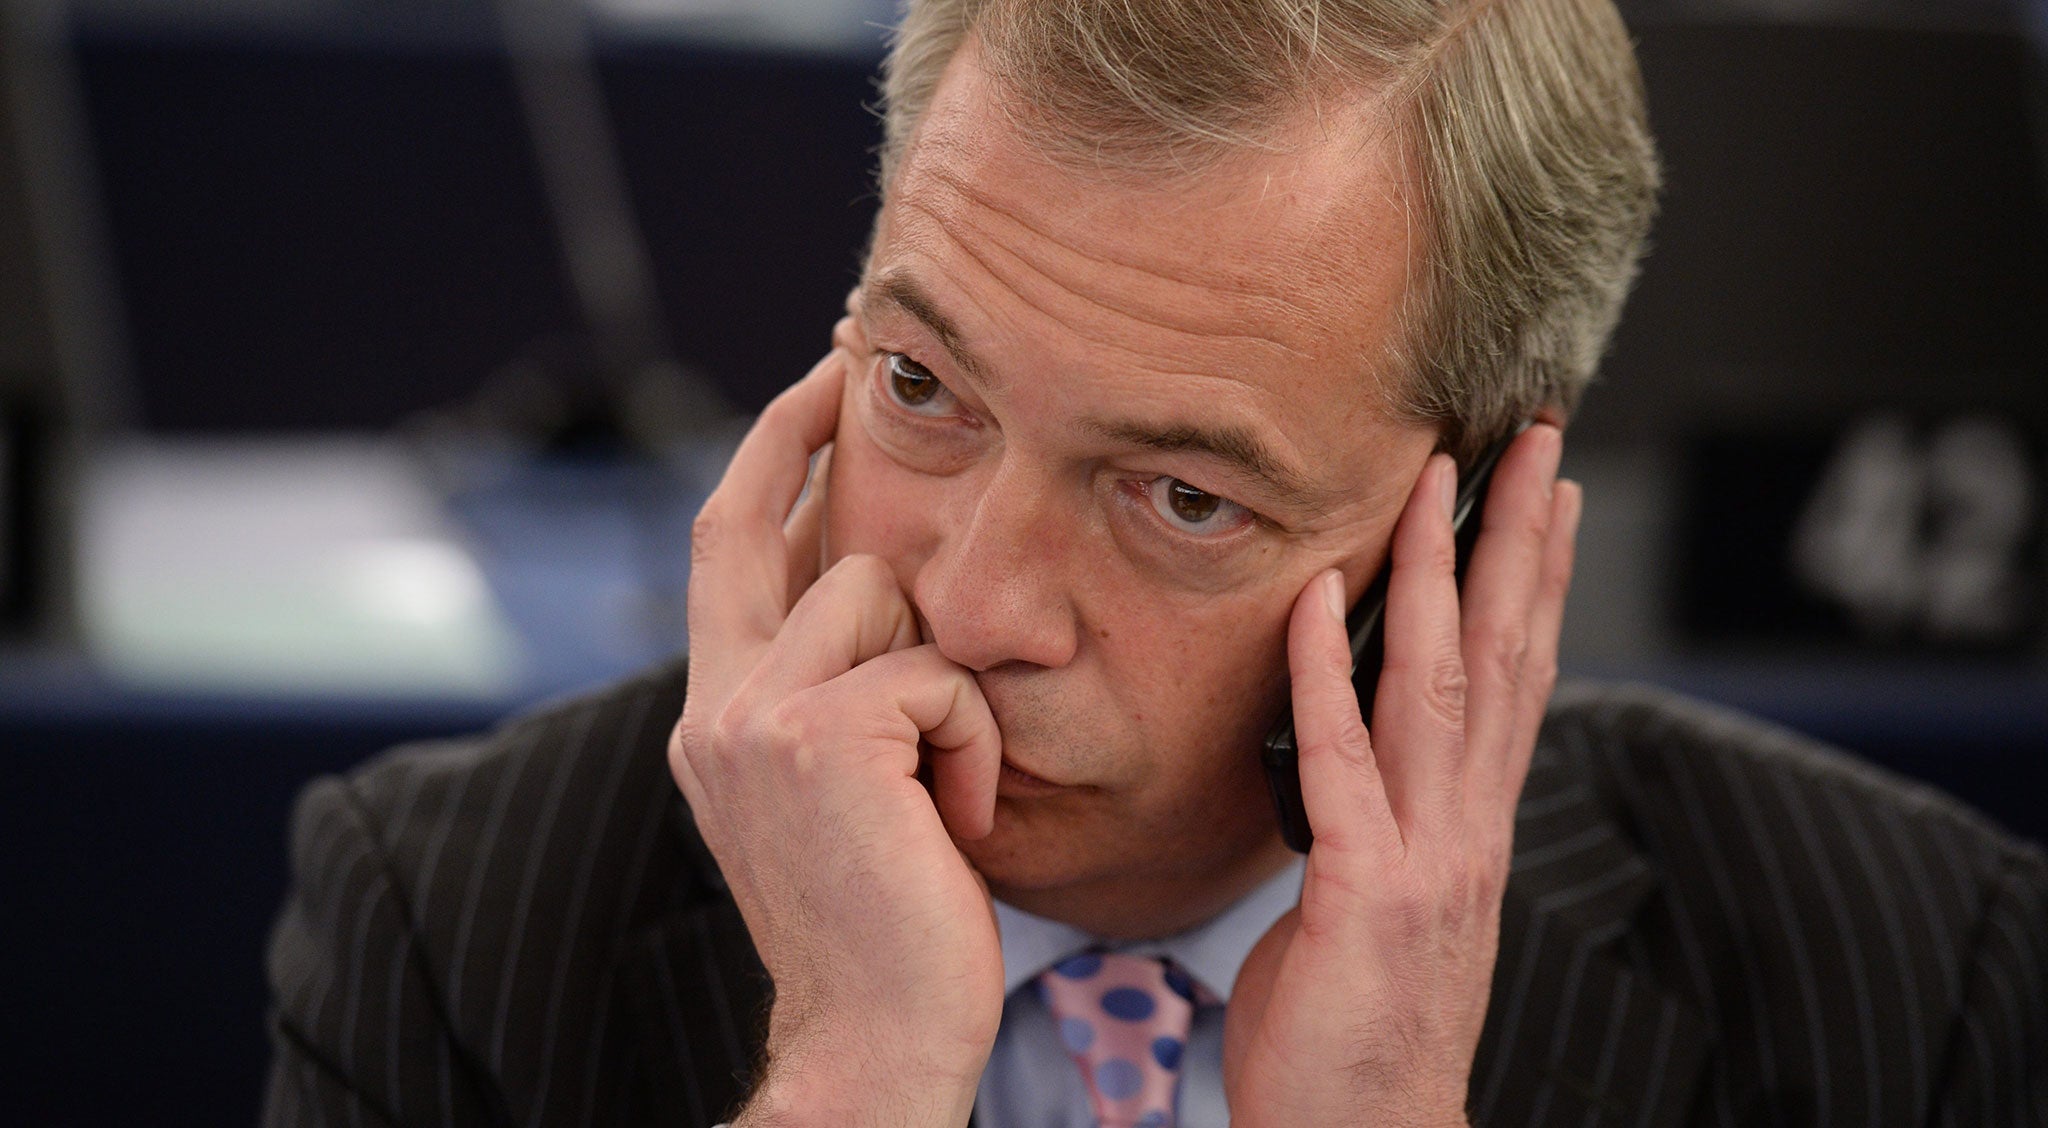 Nigel Farage was left out of BBC One's main Question Time leaders' debate